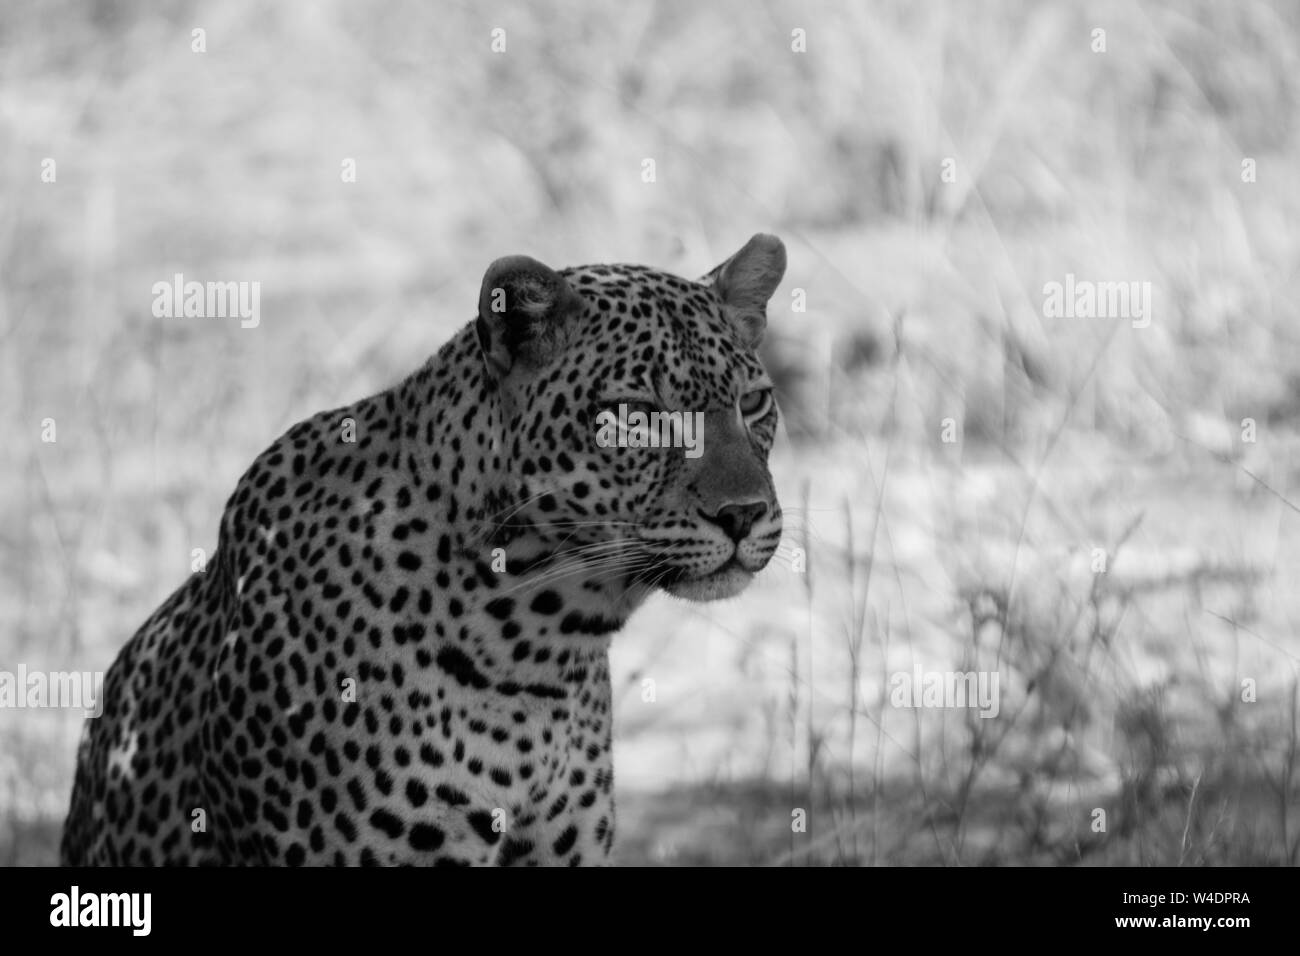 Leopard Black and White Stock Photos & Images - Alamy